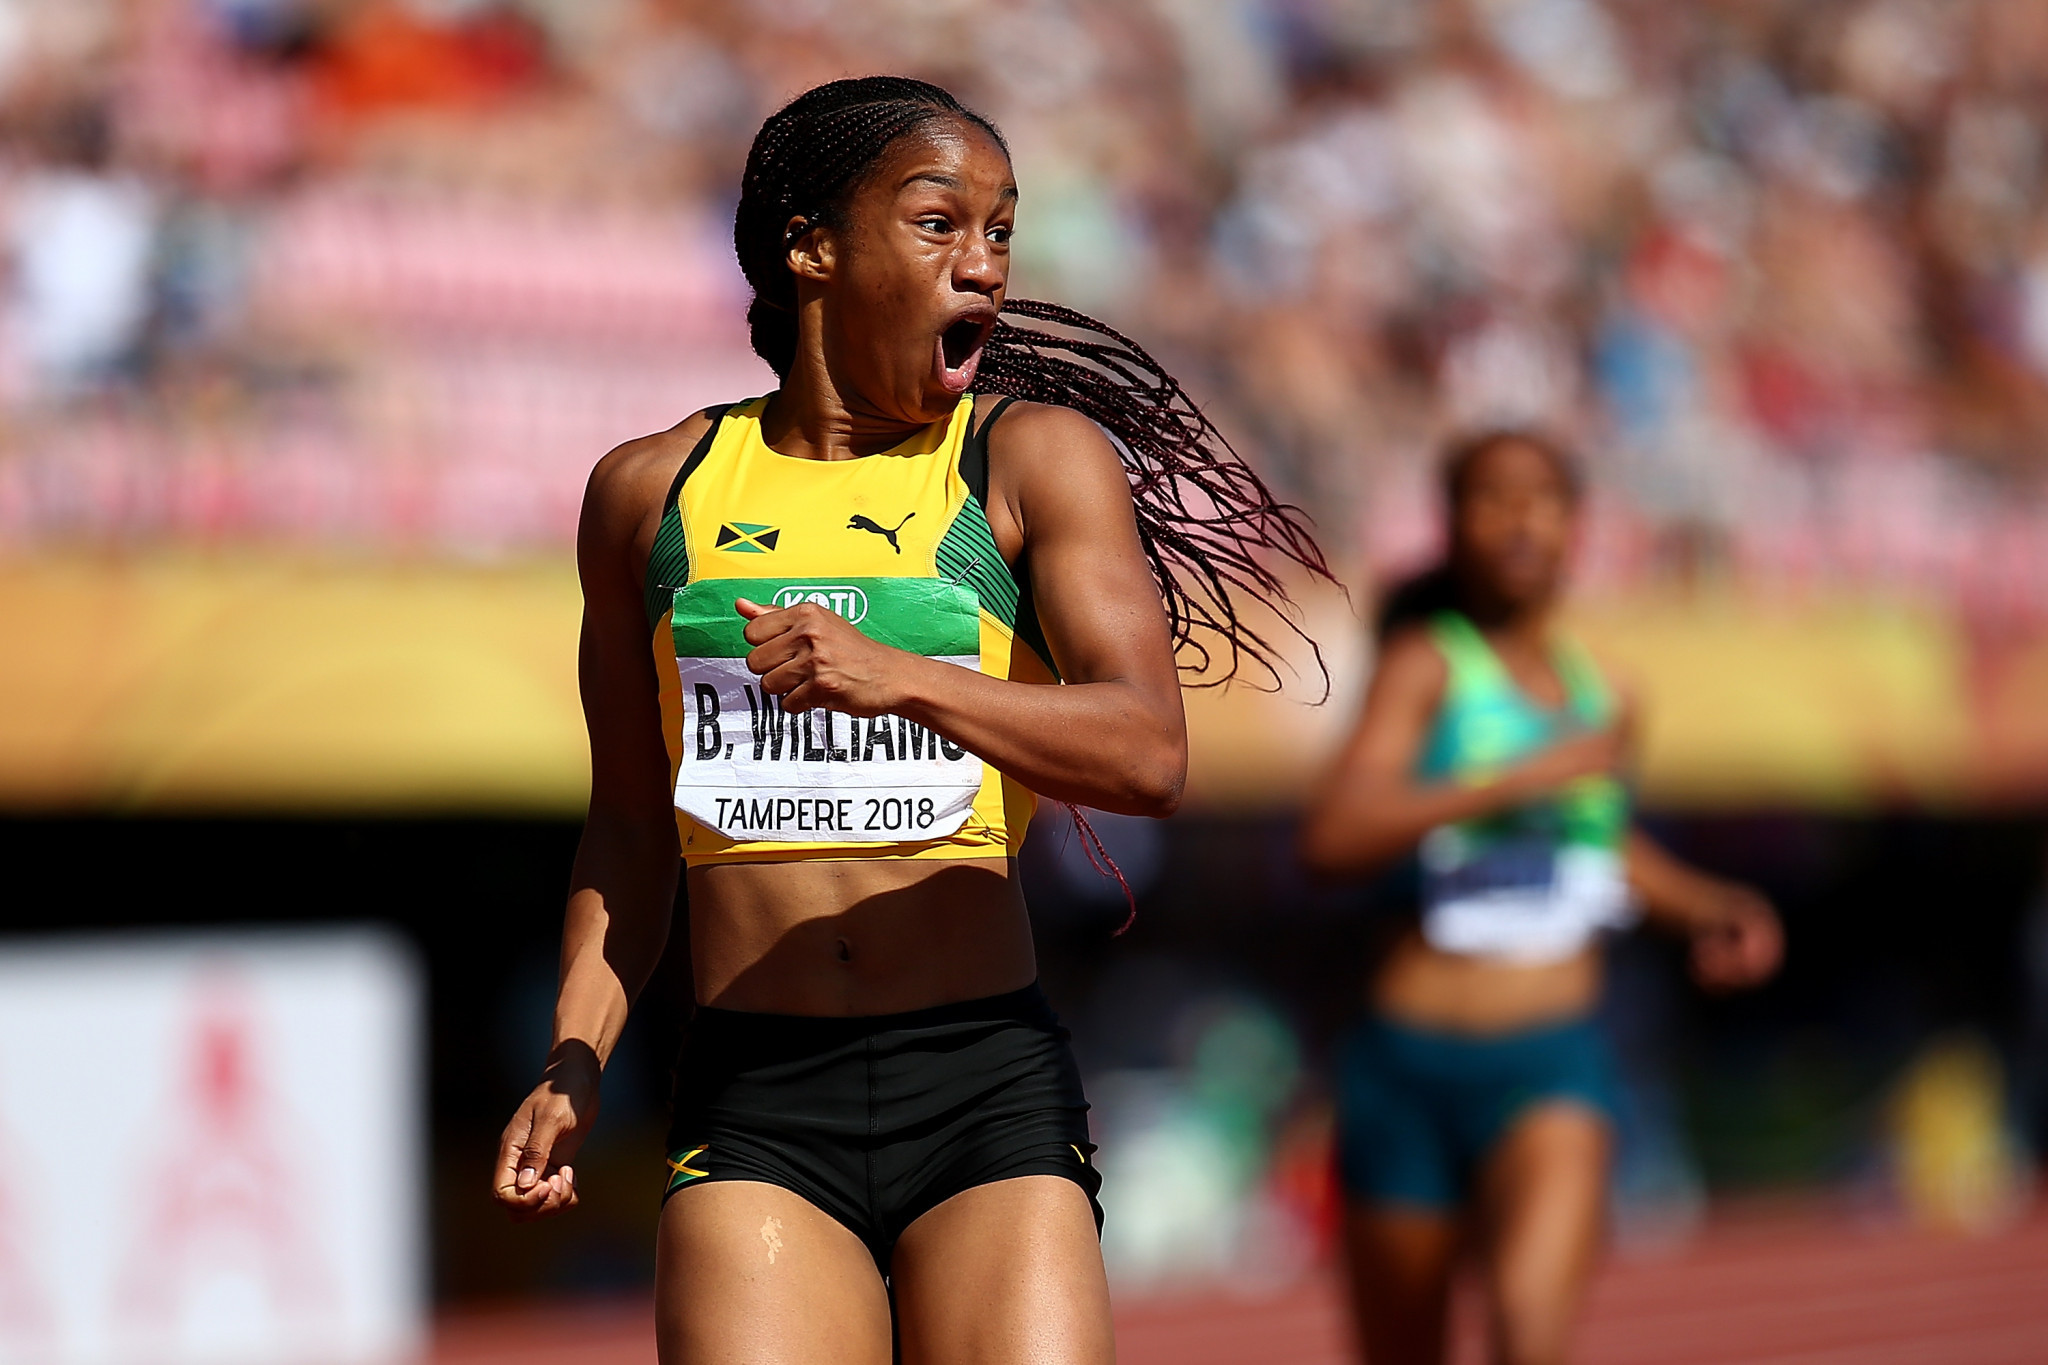 Williams shines as Jamaica dominate opening day at CARIFTA Games